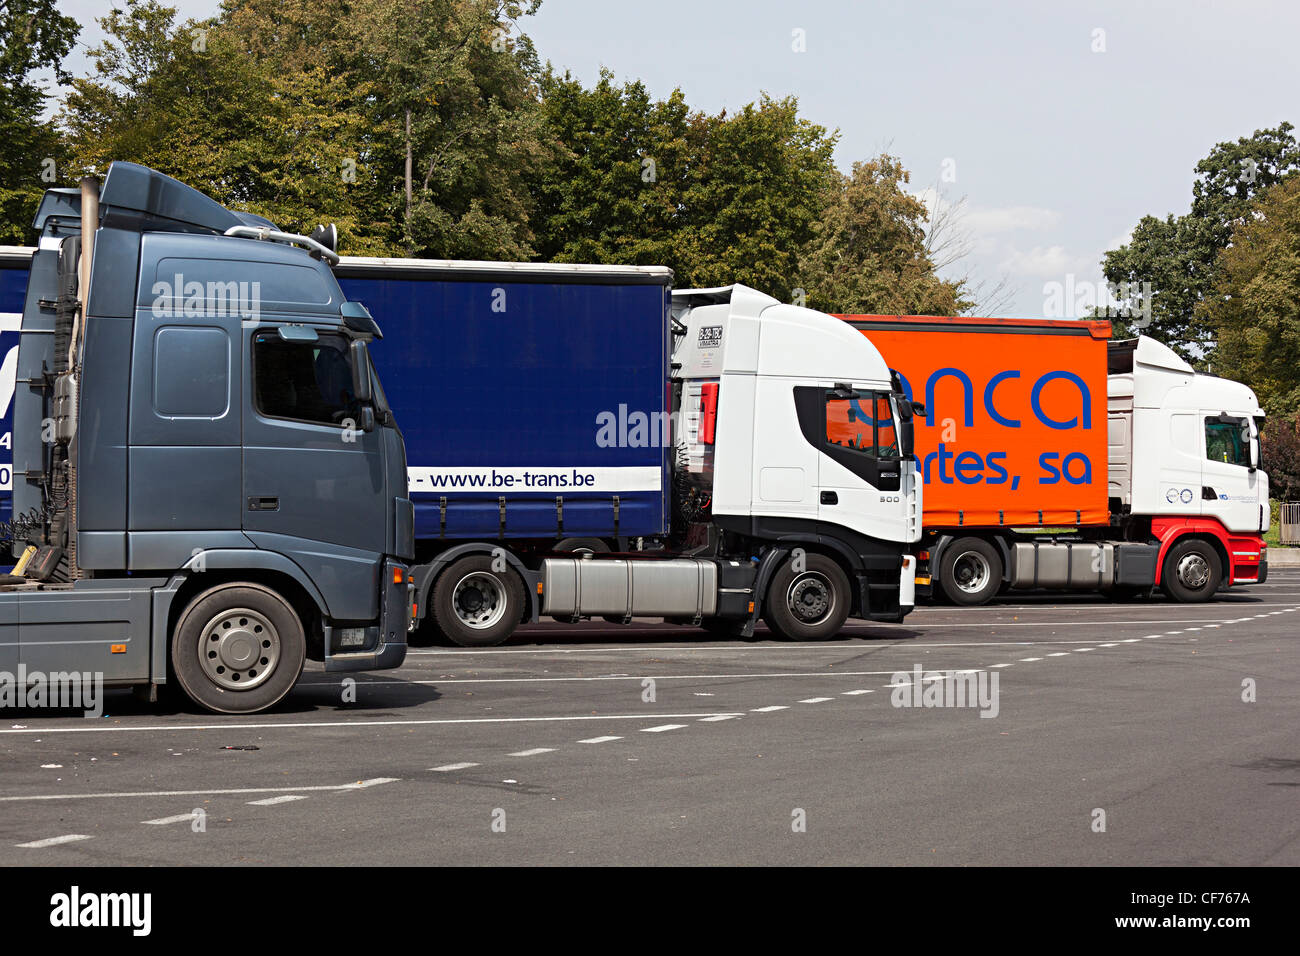 Transport lorries parked in row in lorry park showing web address and different nationalities, Auxerre, Burgundy, France Stock Photo